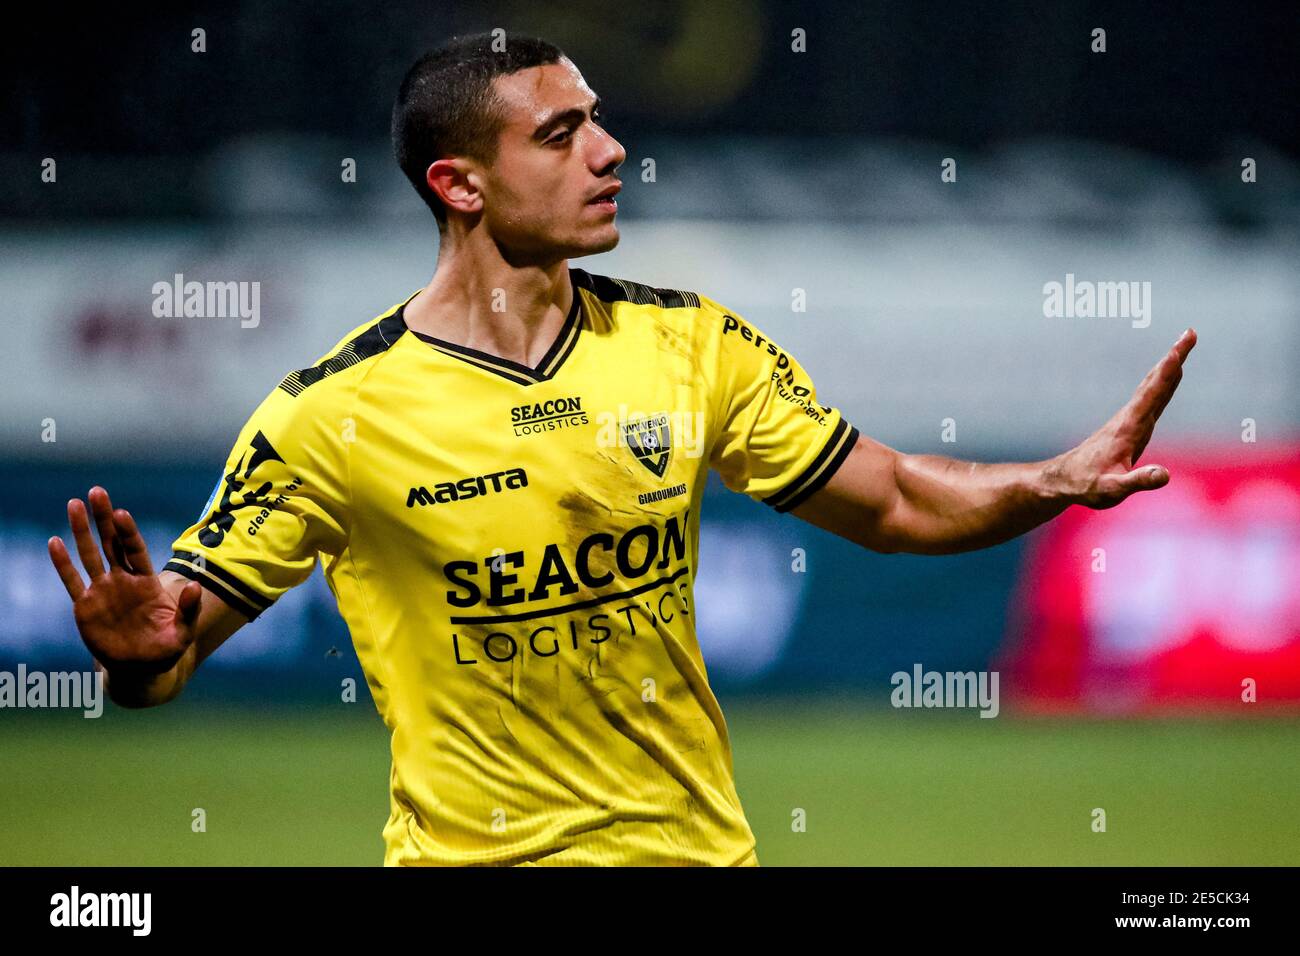 VENLO, NETHERLANDS - JANUARY 27: Georgios Giakoumakis of VVV Venlo  celebrating his 4th official Alex Bos goal during this match (4:1) during  the Dutch Stock Photo - Alamy